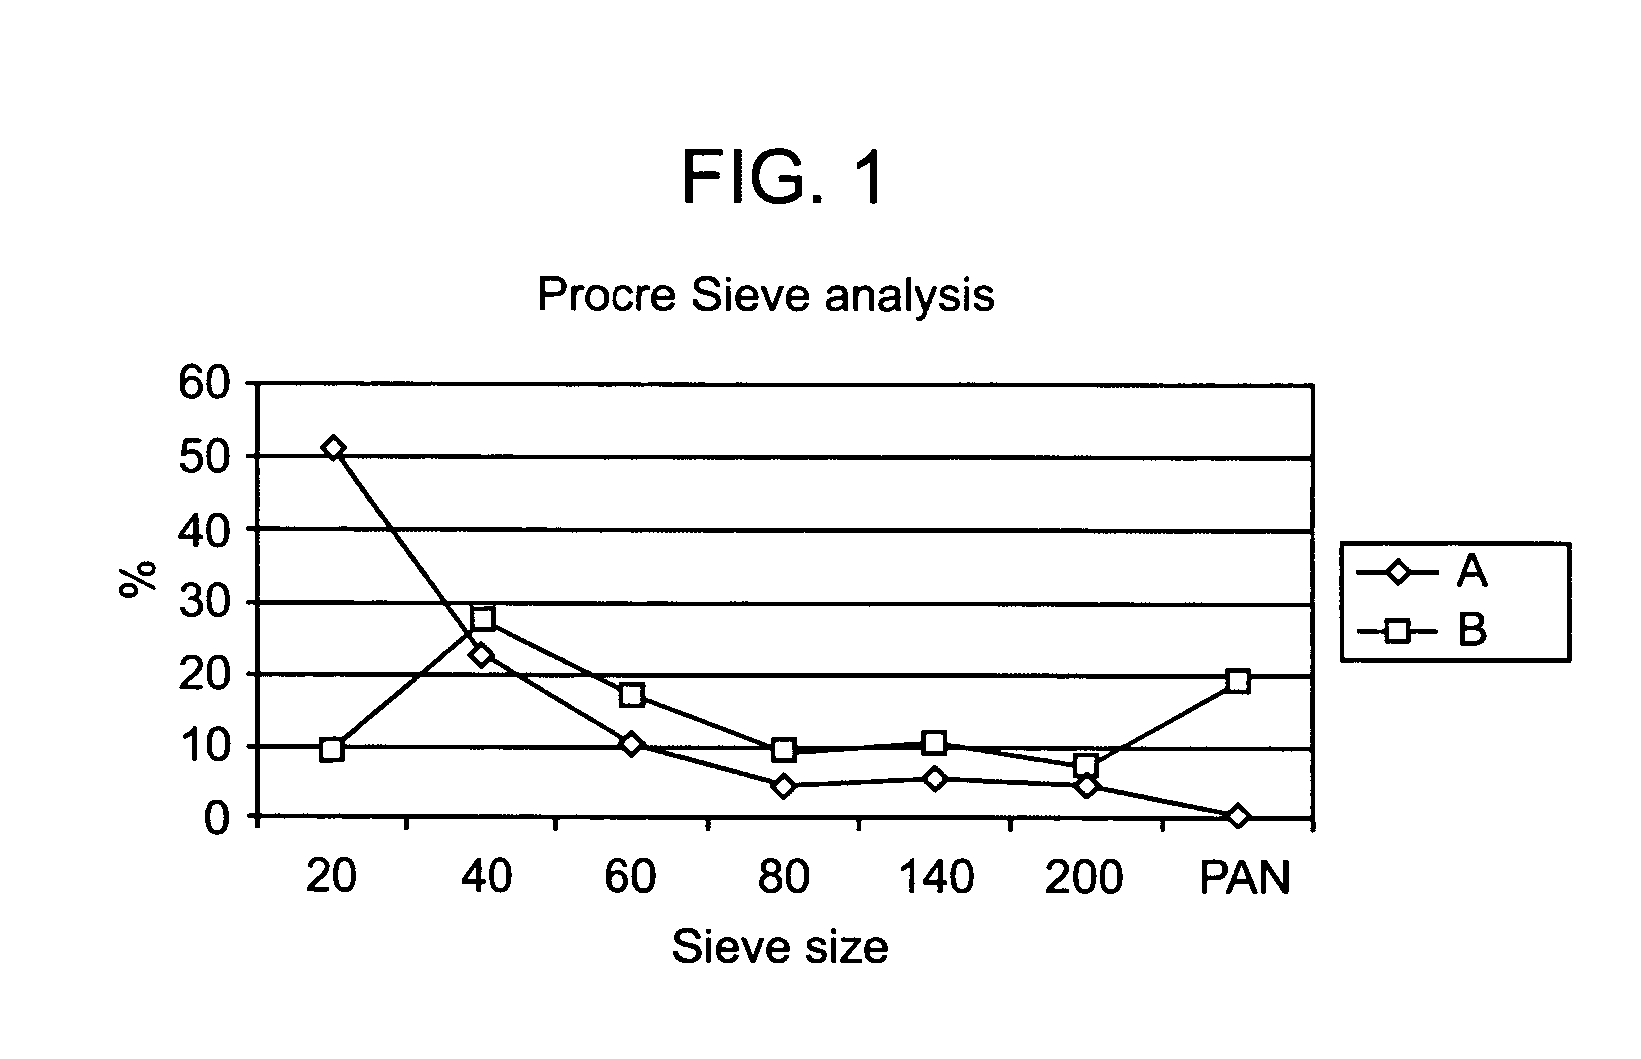 Oral formulation of creatine derivatives and method of manufacturing same